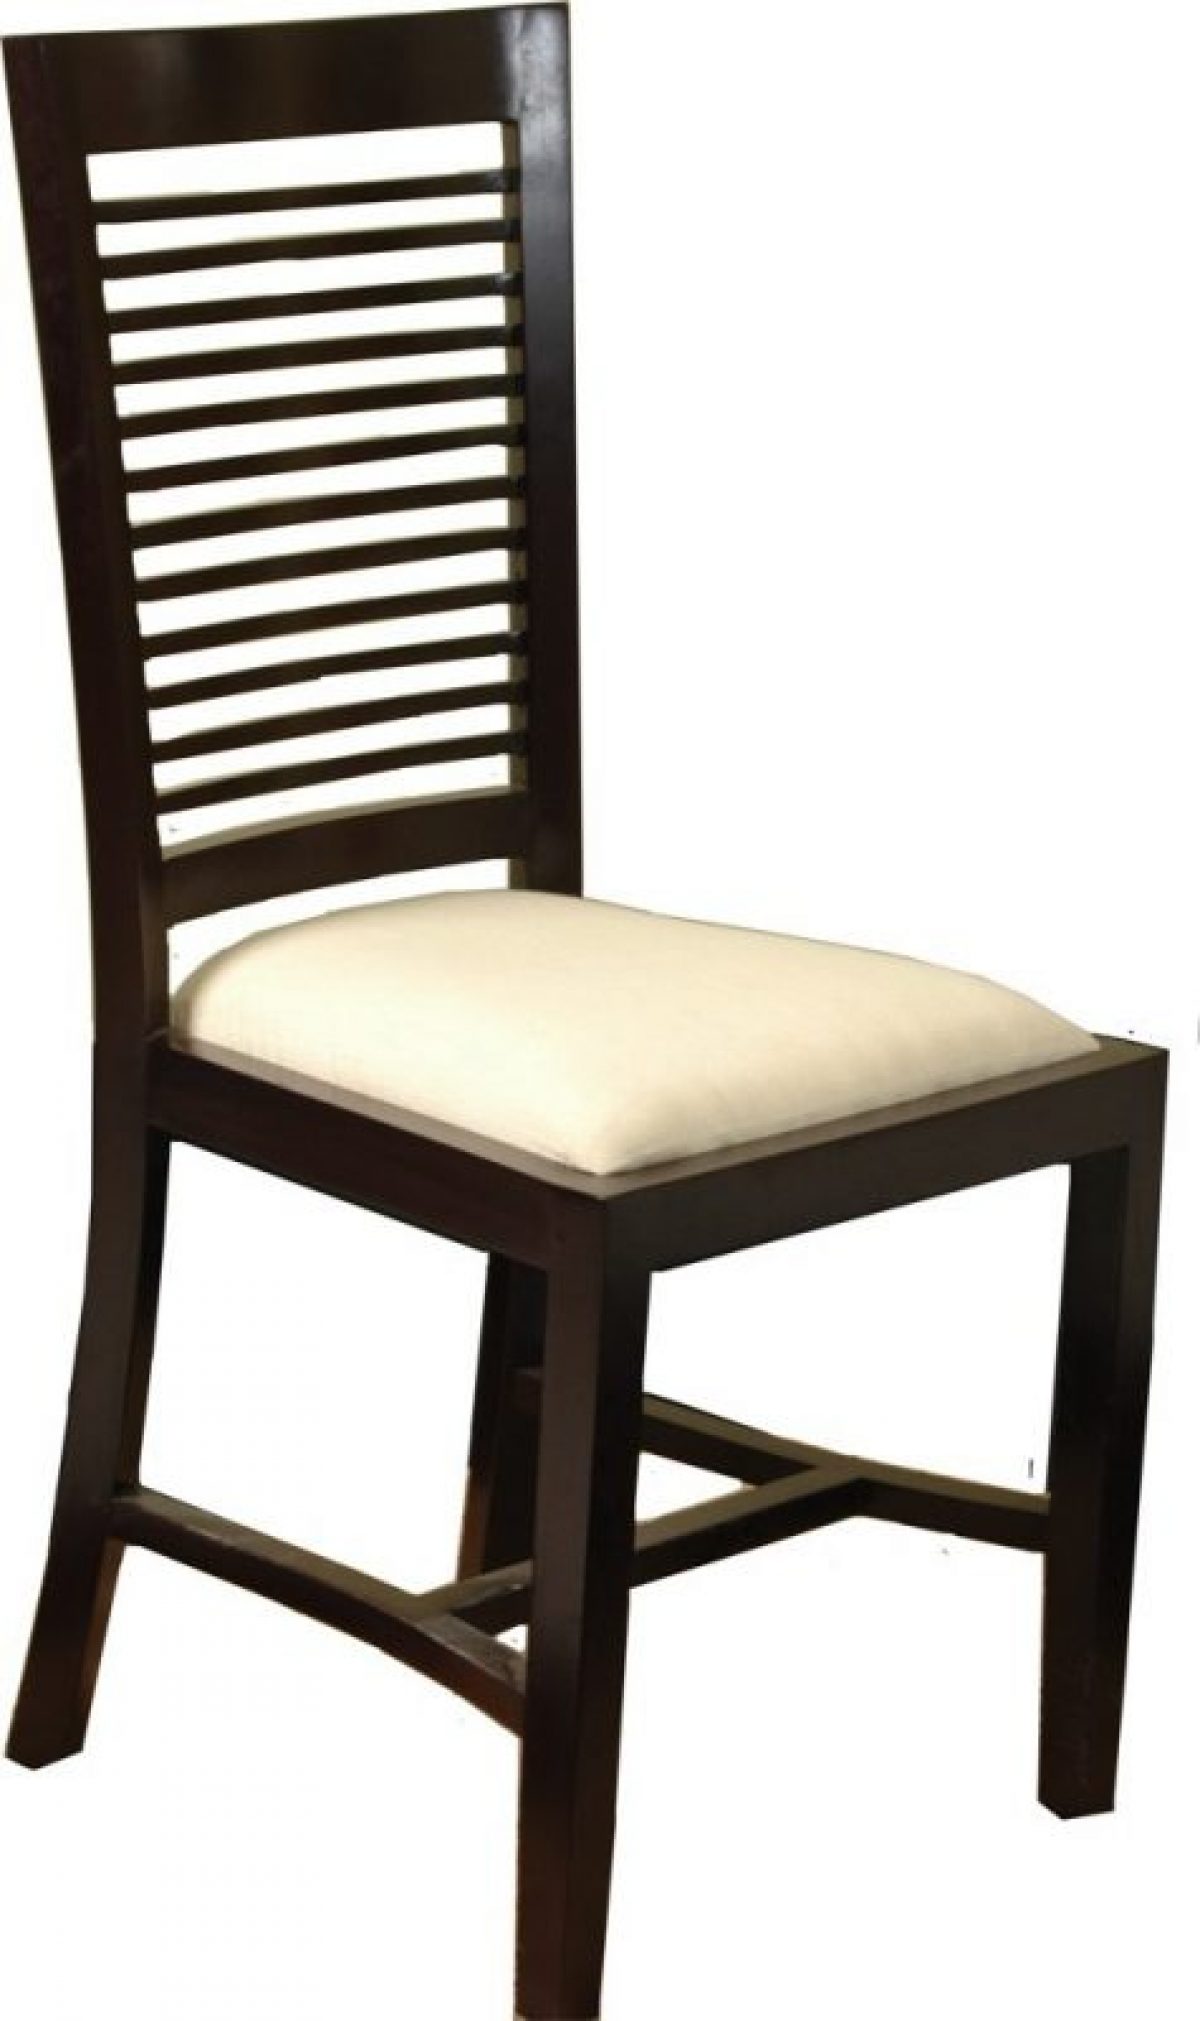 Mexican Chair Chairs Manufacture Asia Furniture